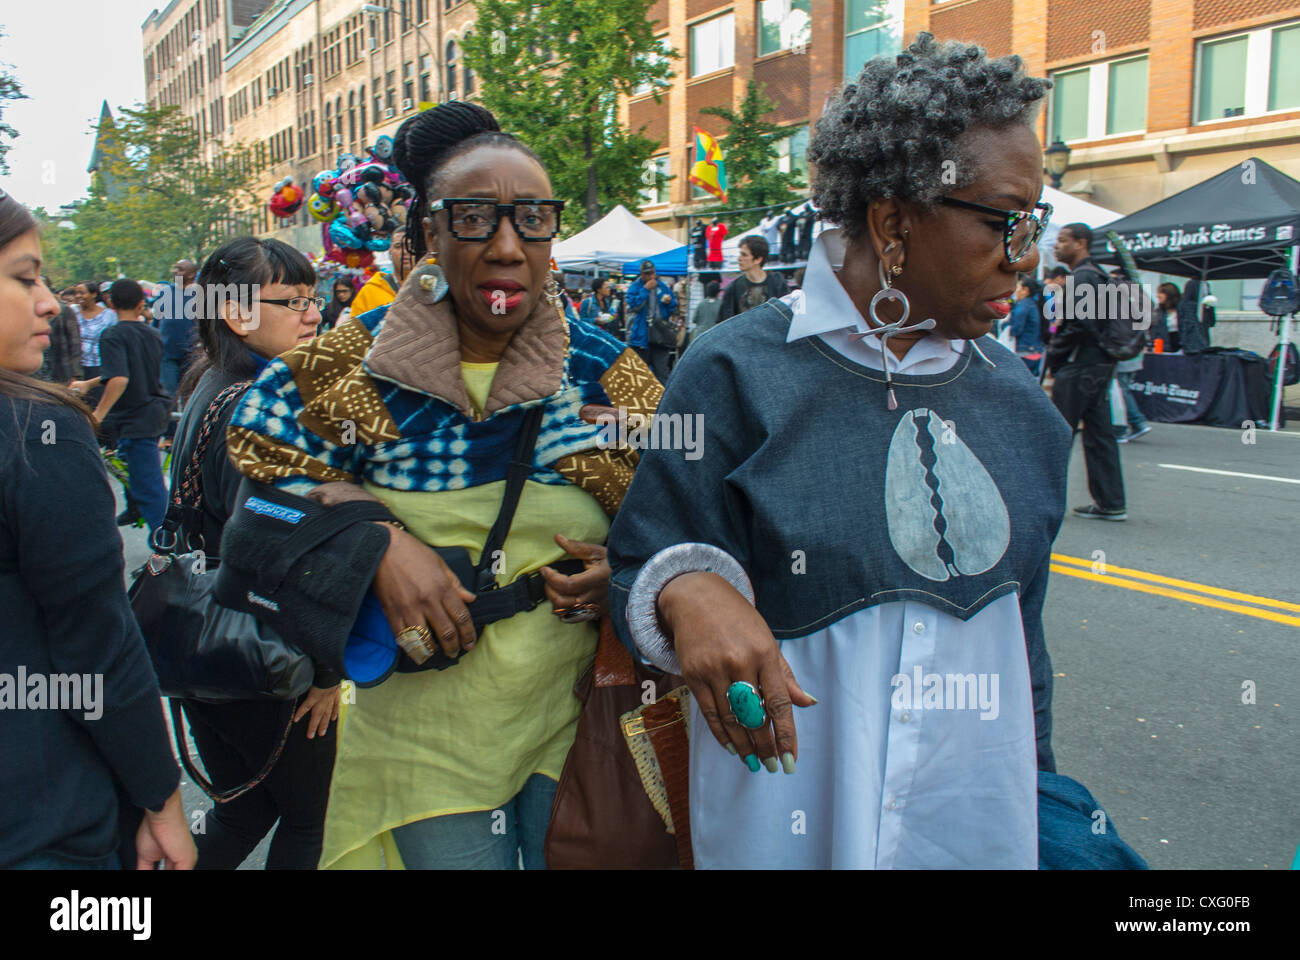 New York City, USA, African American Women in crowd, Promenading at the